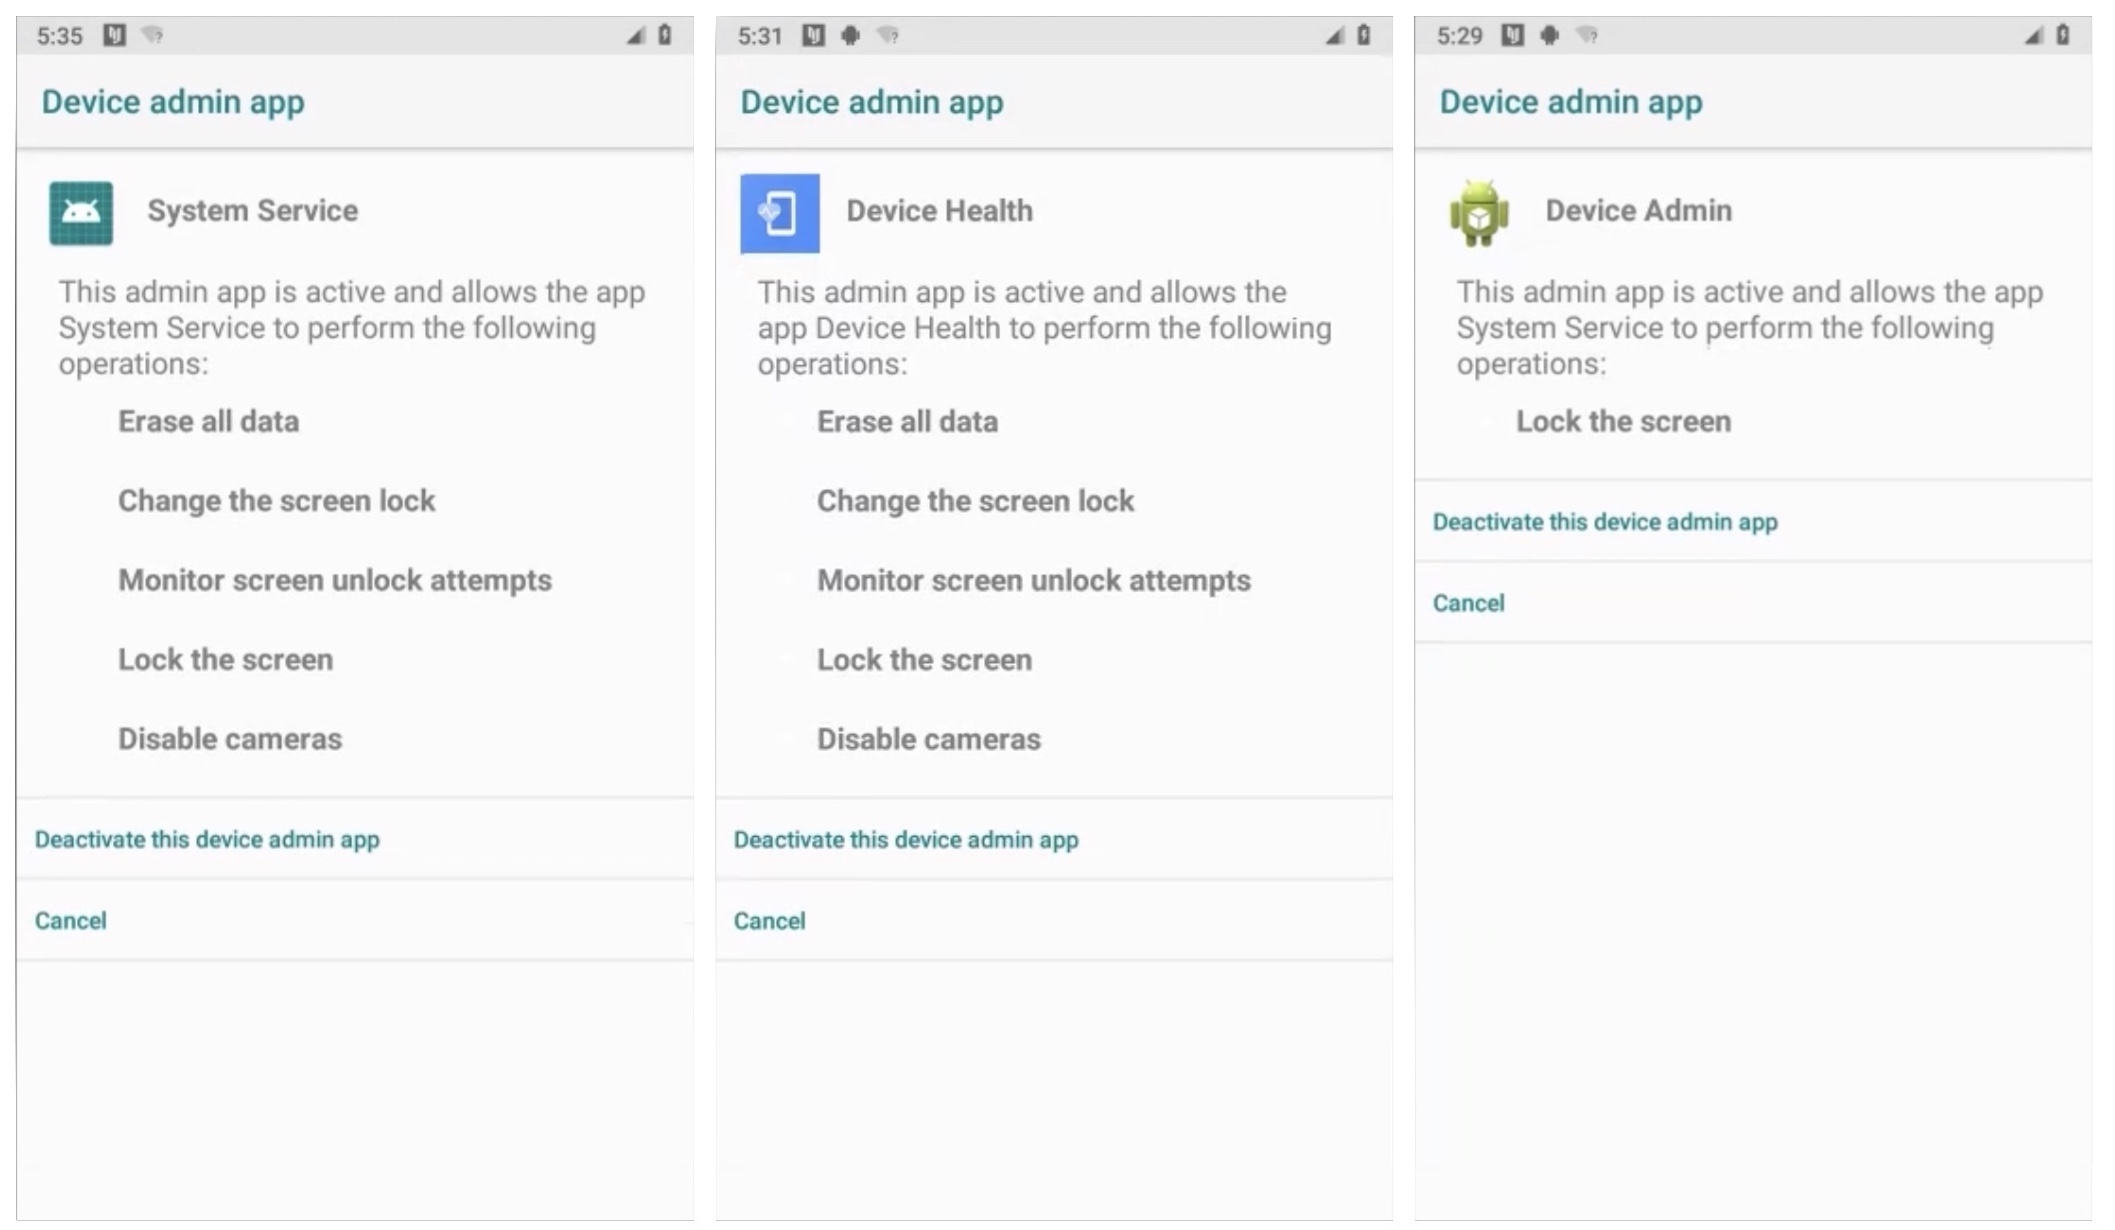 Screenshots showing the Android device admin app panel.